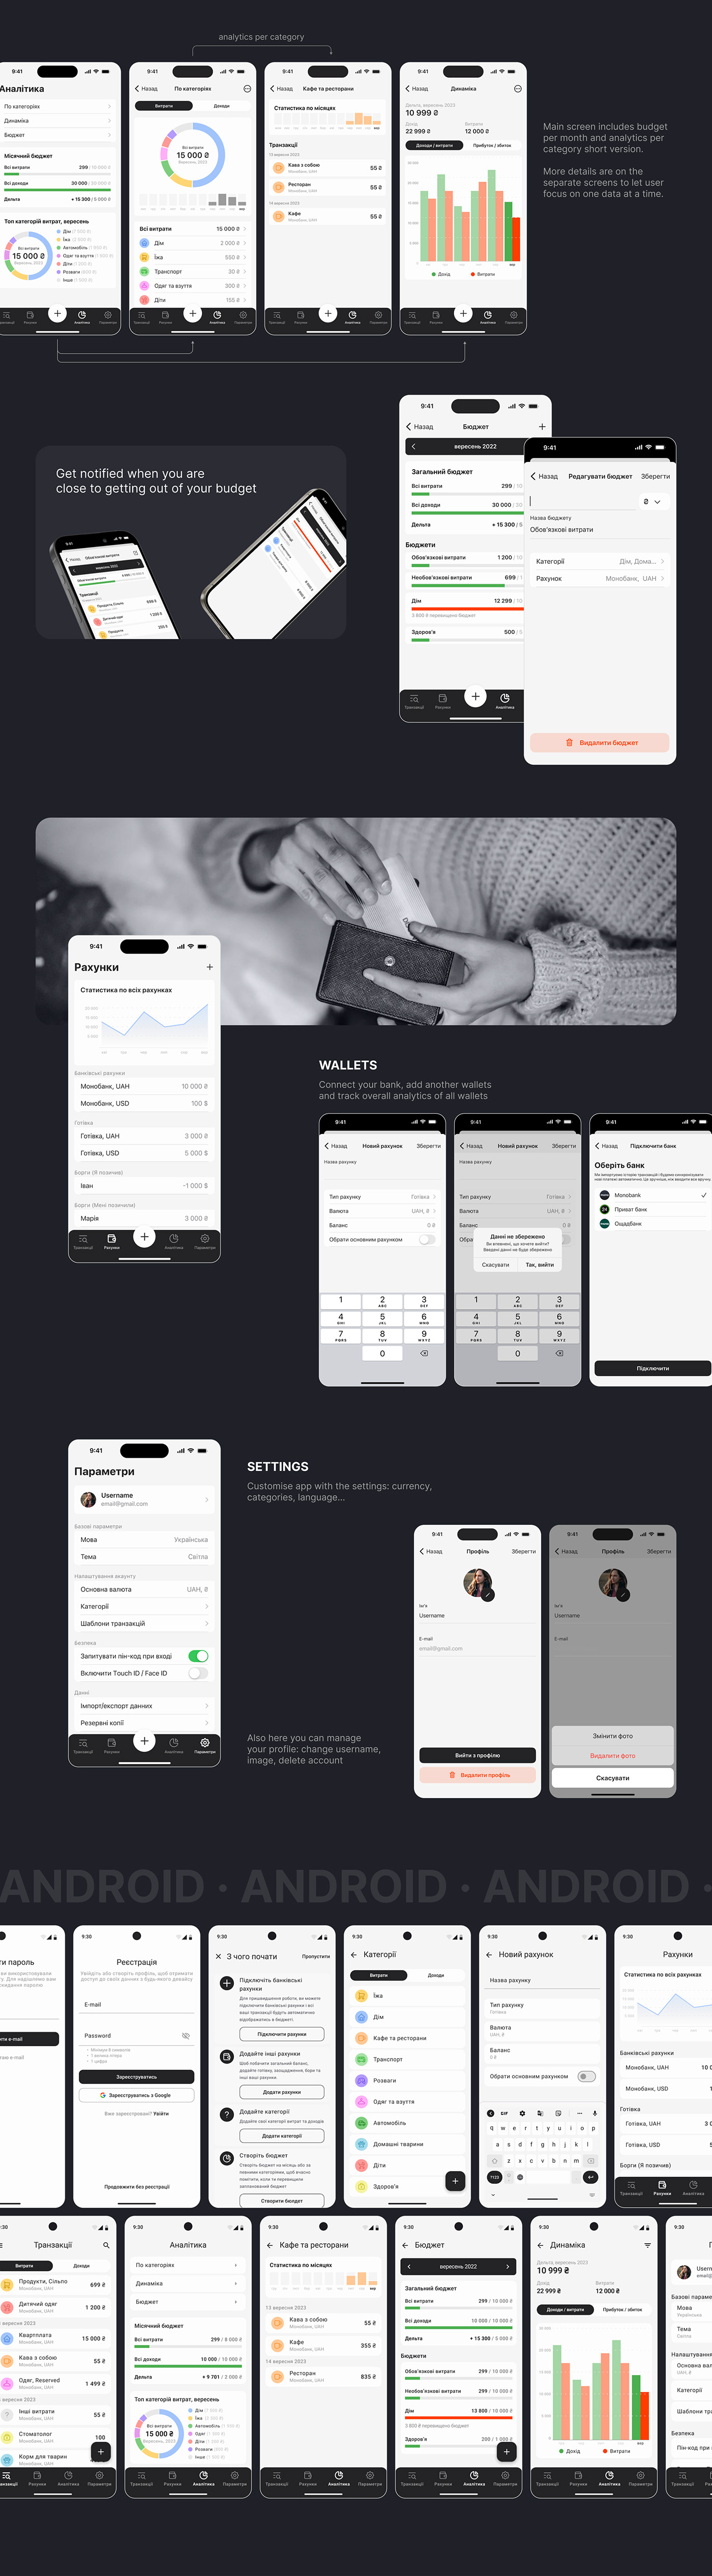 UI/UX Mobile app UX design user interface user experience app design ios android